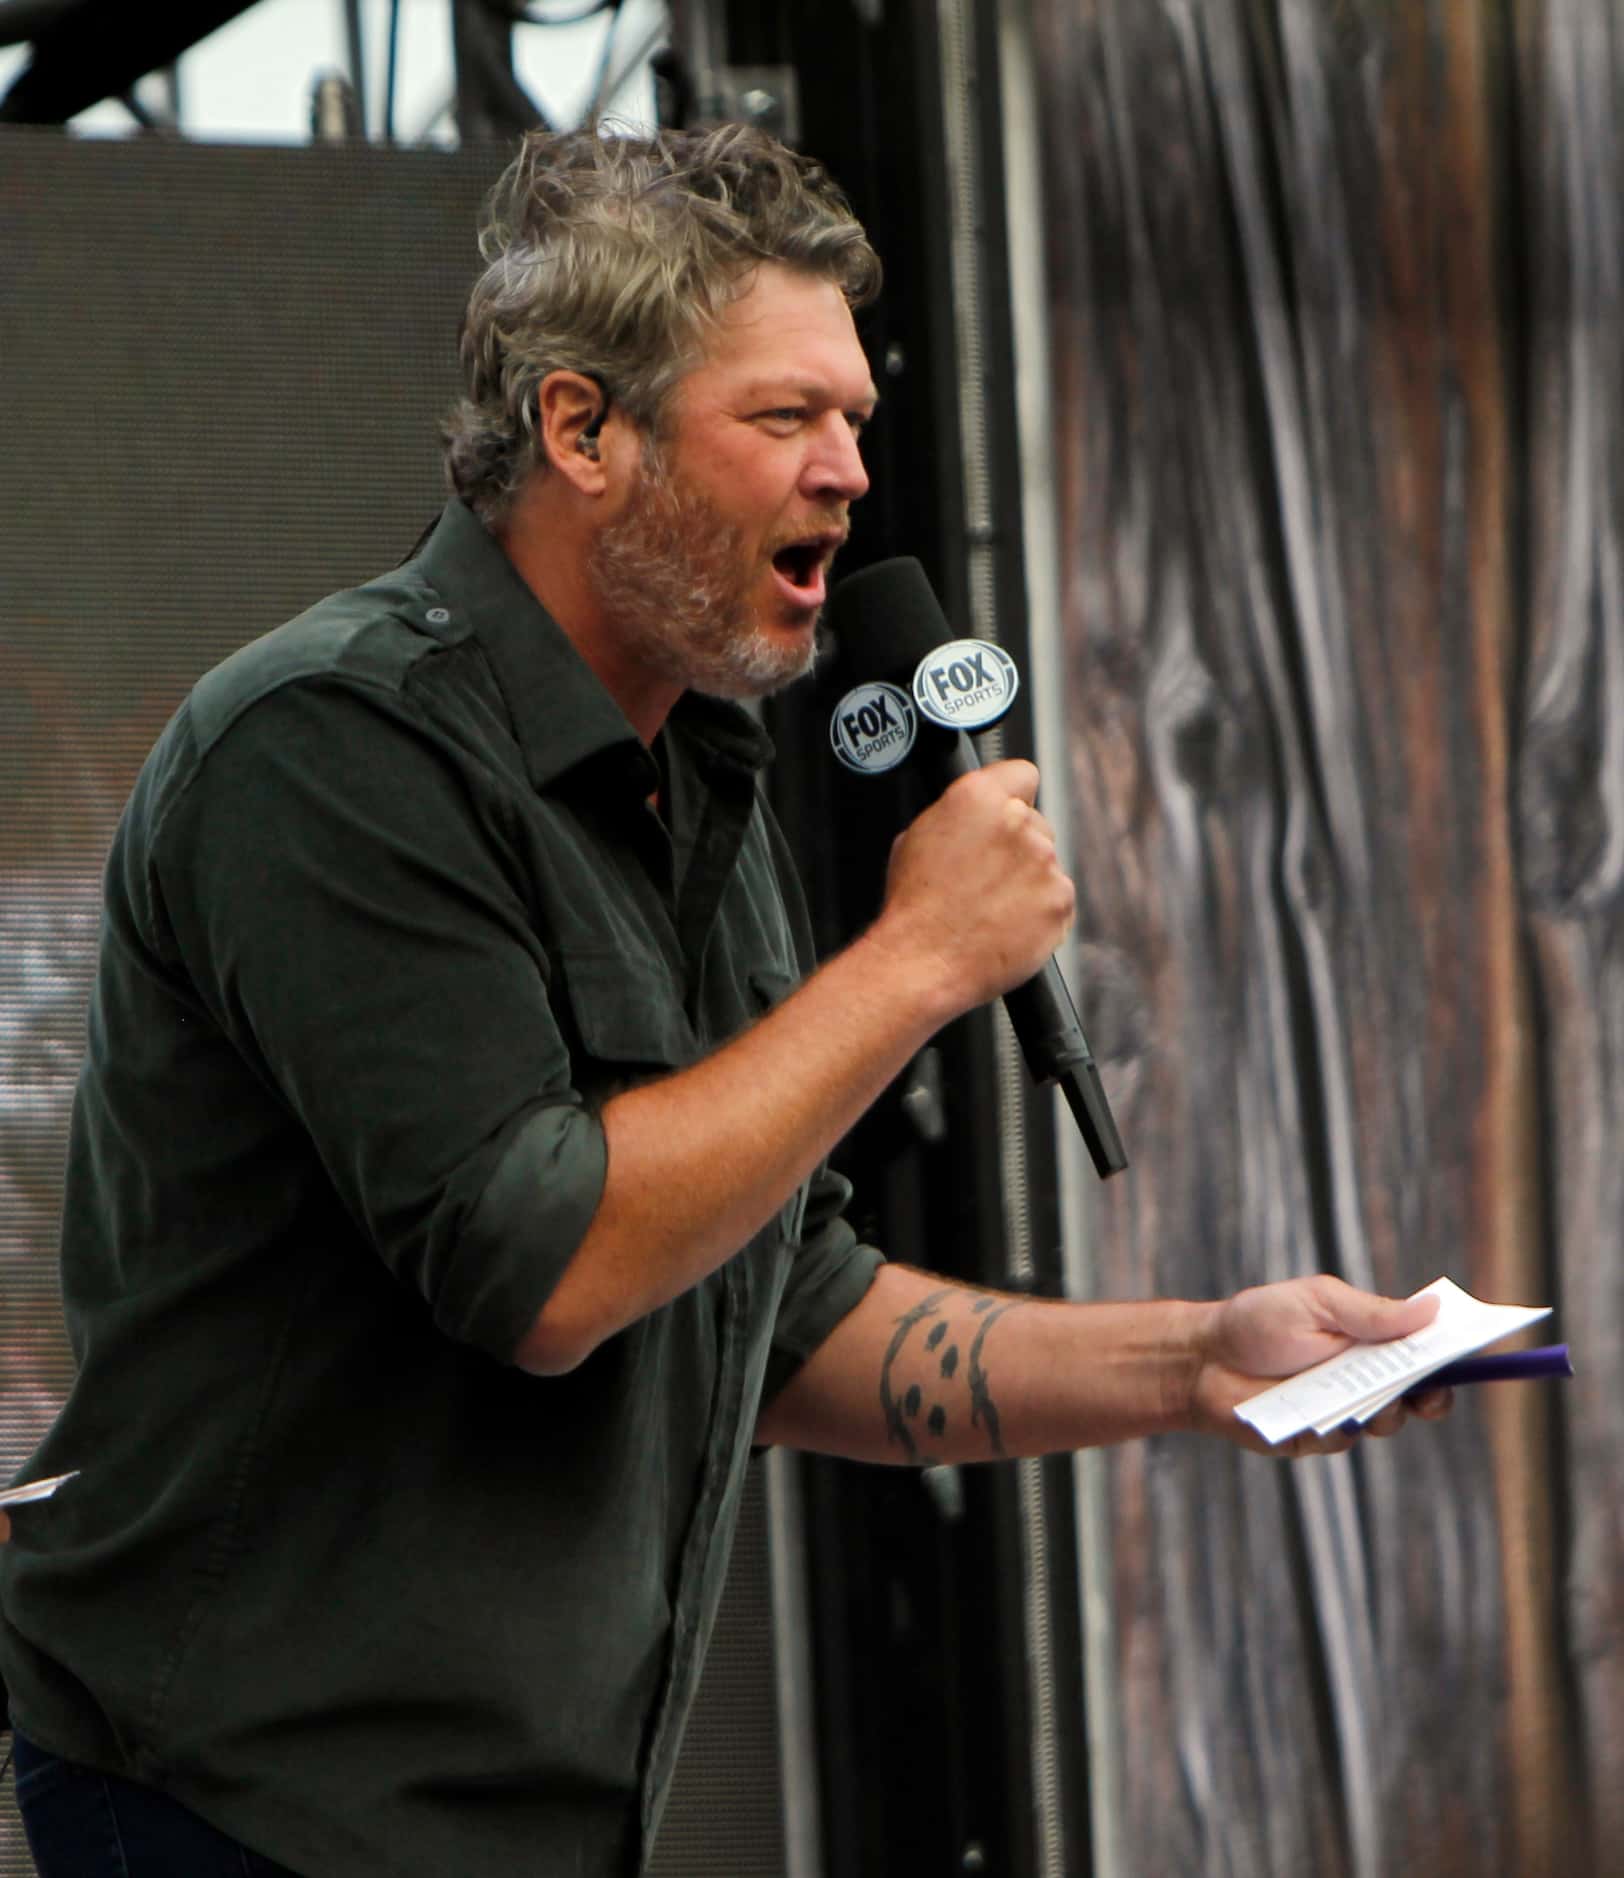 Country entertainer Blake Shelton pitched in to help introduce drivers to the large crowd...